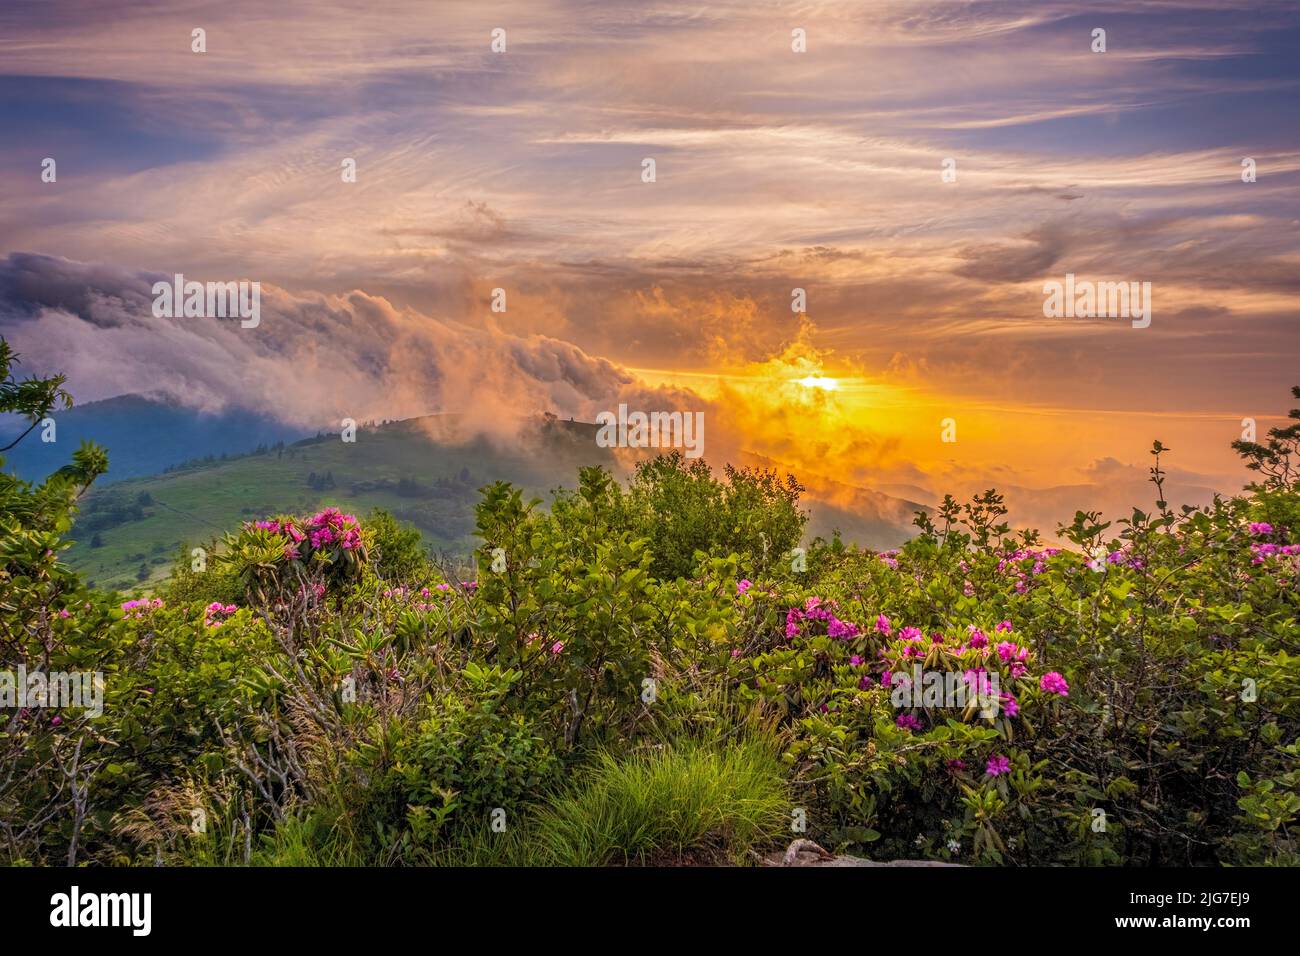 Roan Mountain Sunset over Rhododendron flower gardens and storm clouds Stock Photo